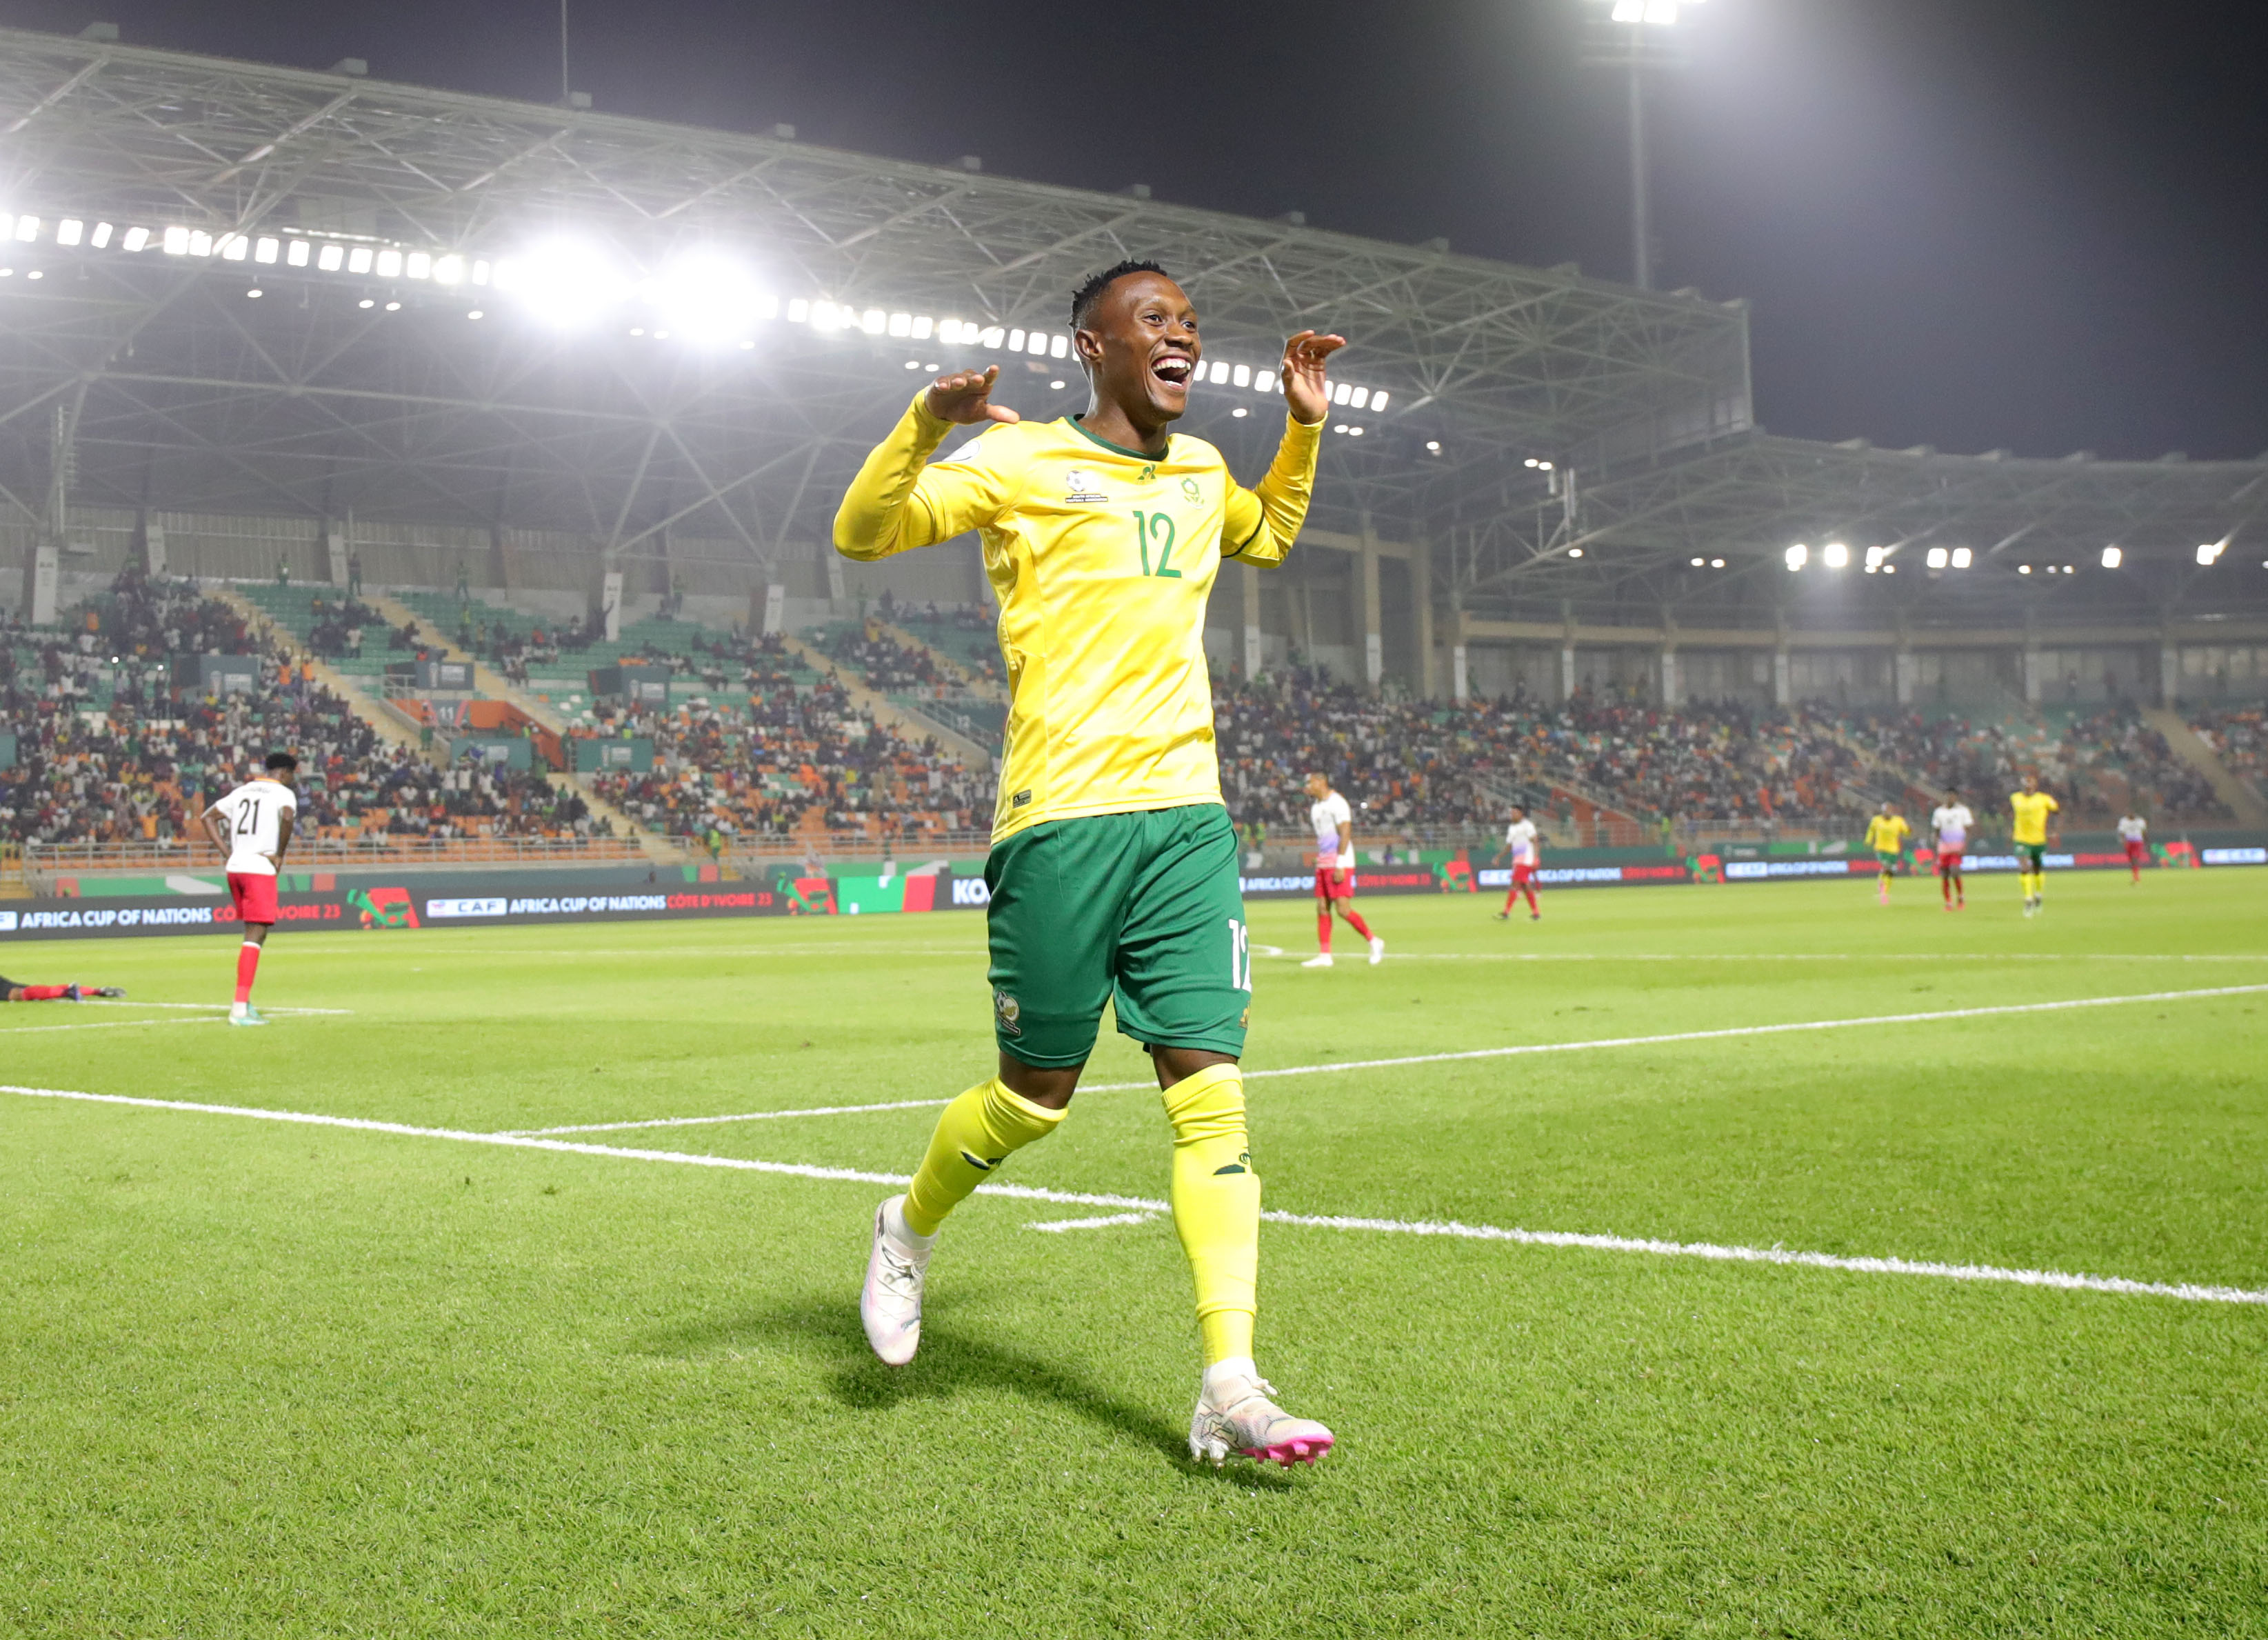 bafana bafana rout namibia, but not out of the woods yet